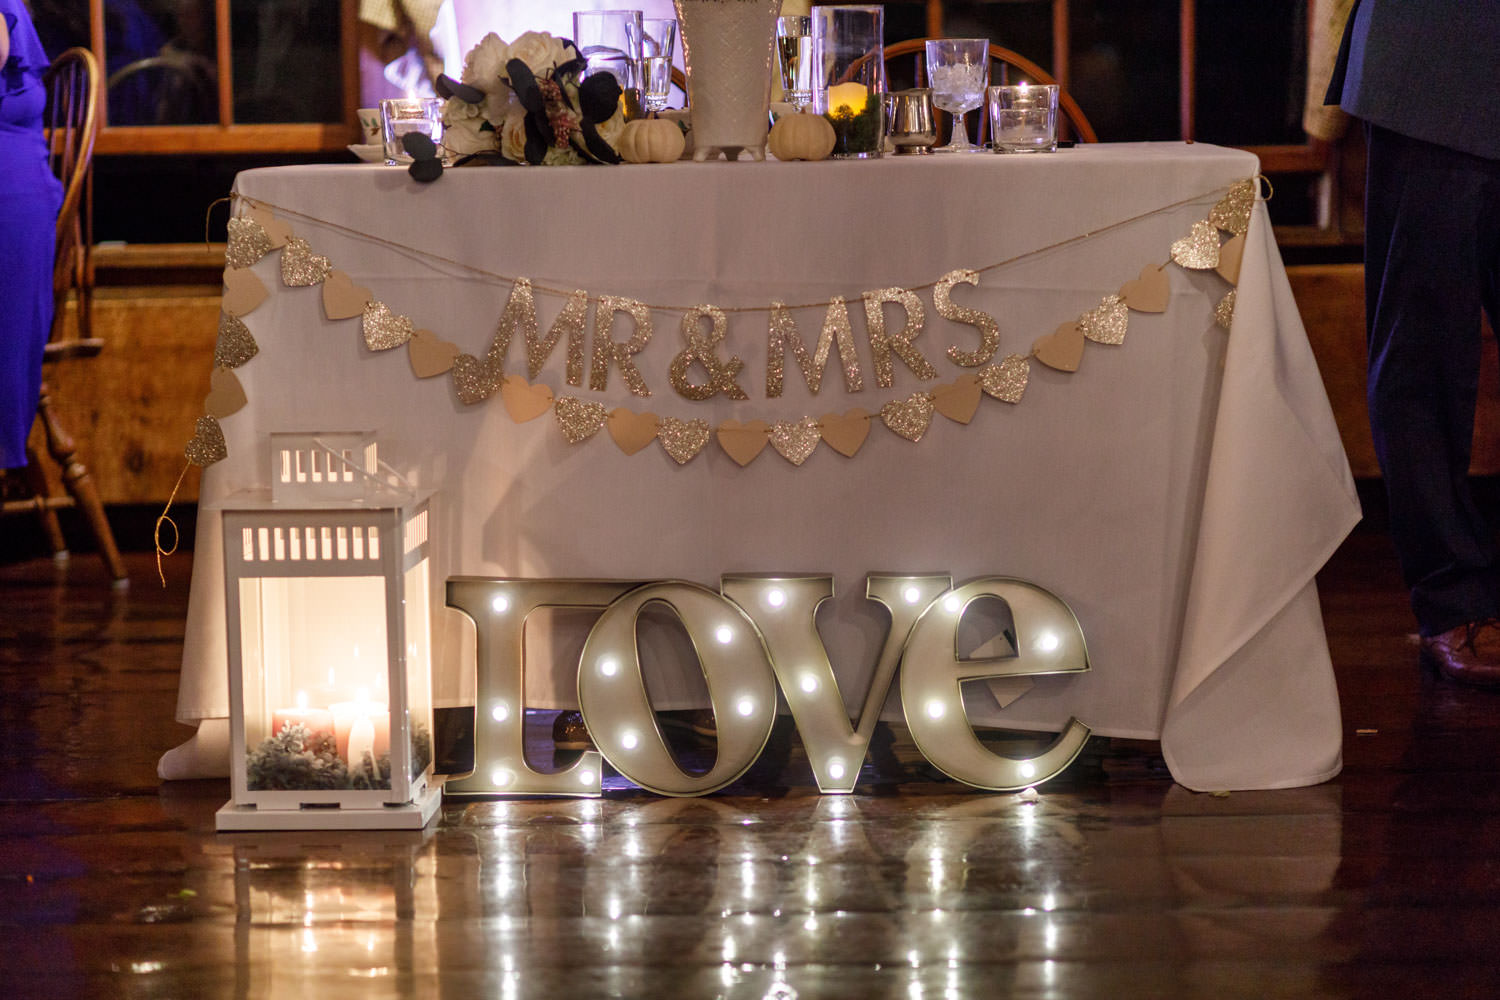 Sweetheart table with Love sign in the foreground.